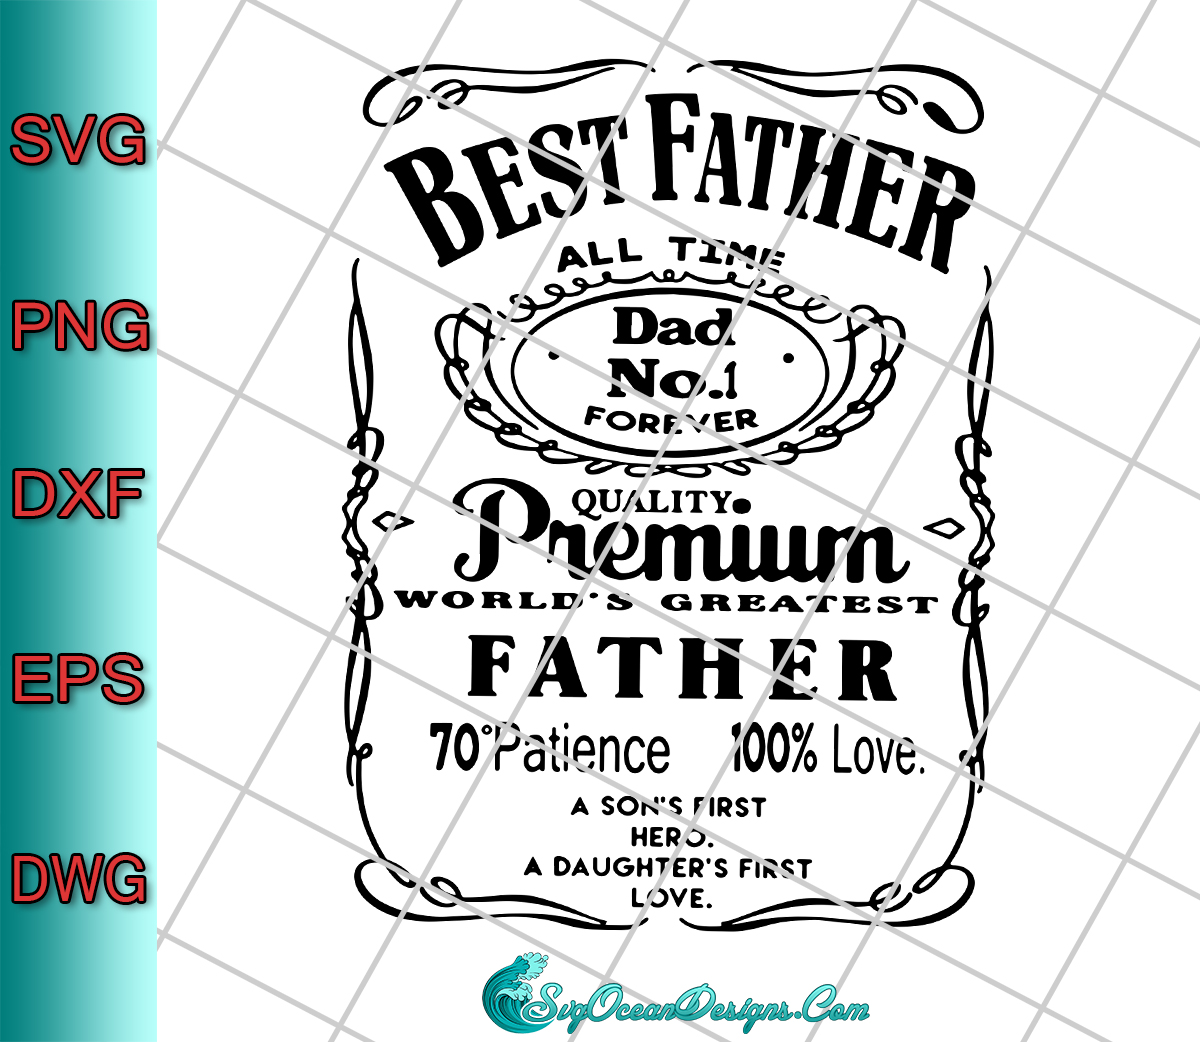 Download Best Father All Time Dad No.1 Forever Svg Png Dxf Eps, Cut ...